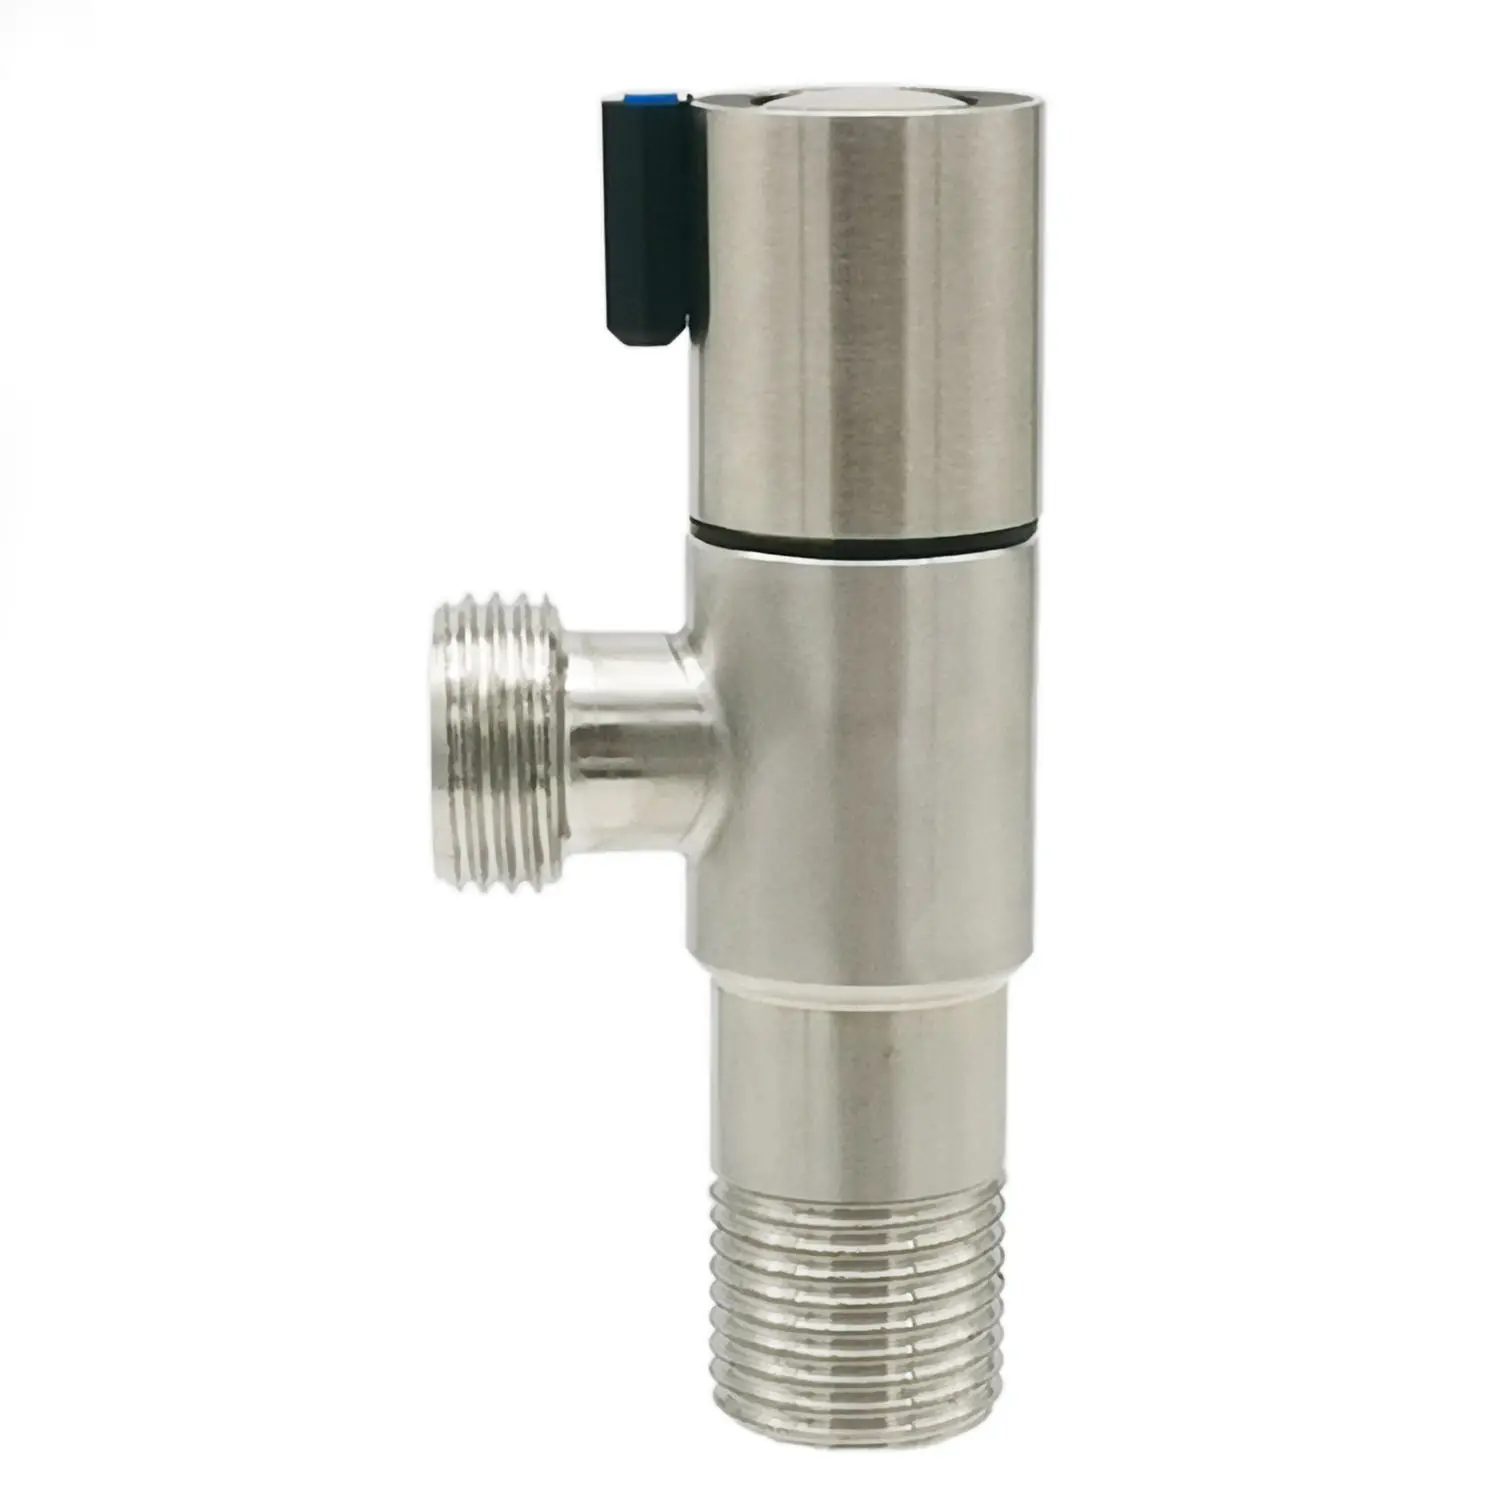 Wholesale Stainless Steel Chromed Brass Angle Valve Bathroom Brushed Nickel Water Stop Valve